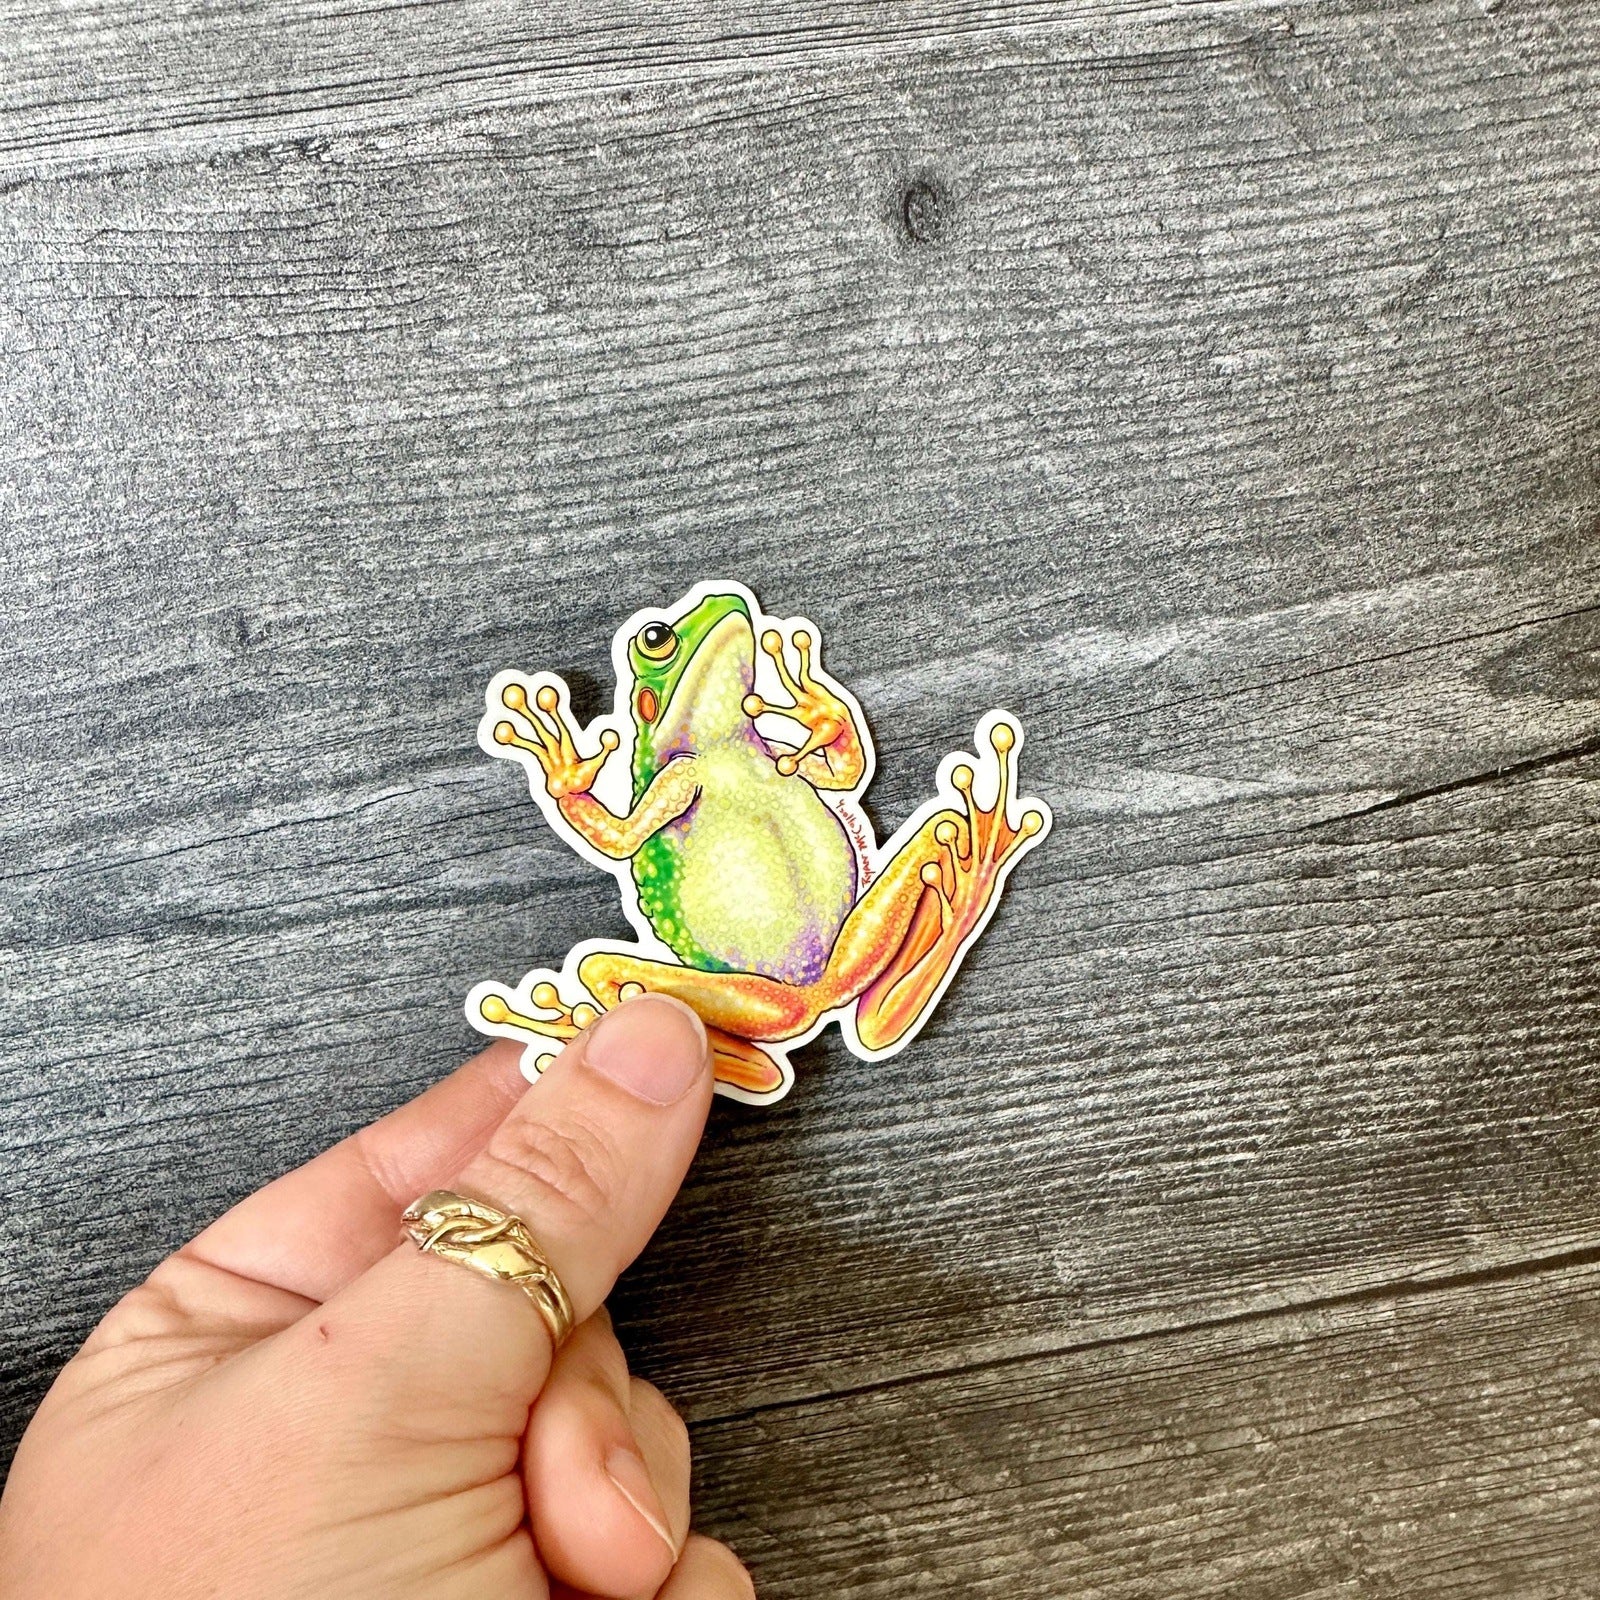 Climbing Tree Frog Sticker (Belly View) | Clear sticker